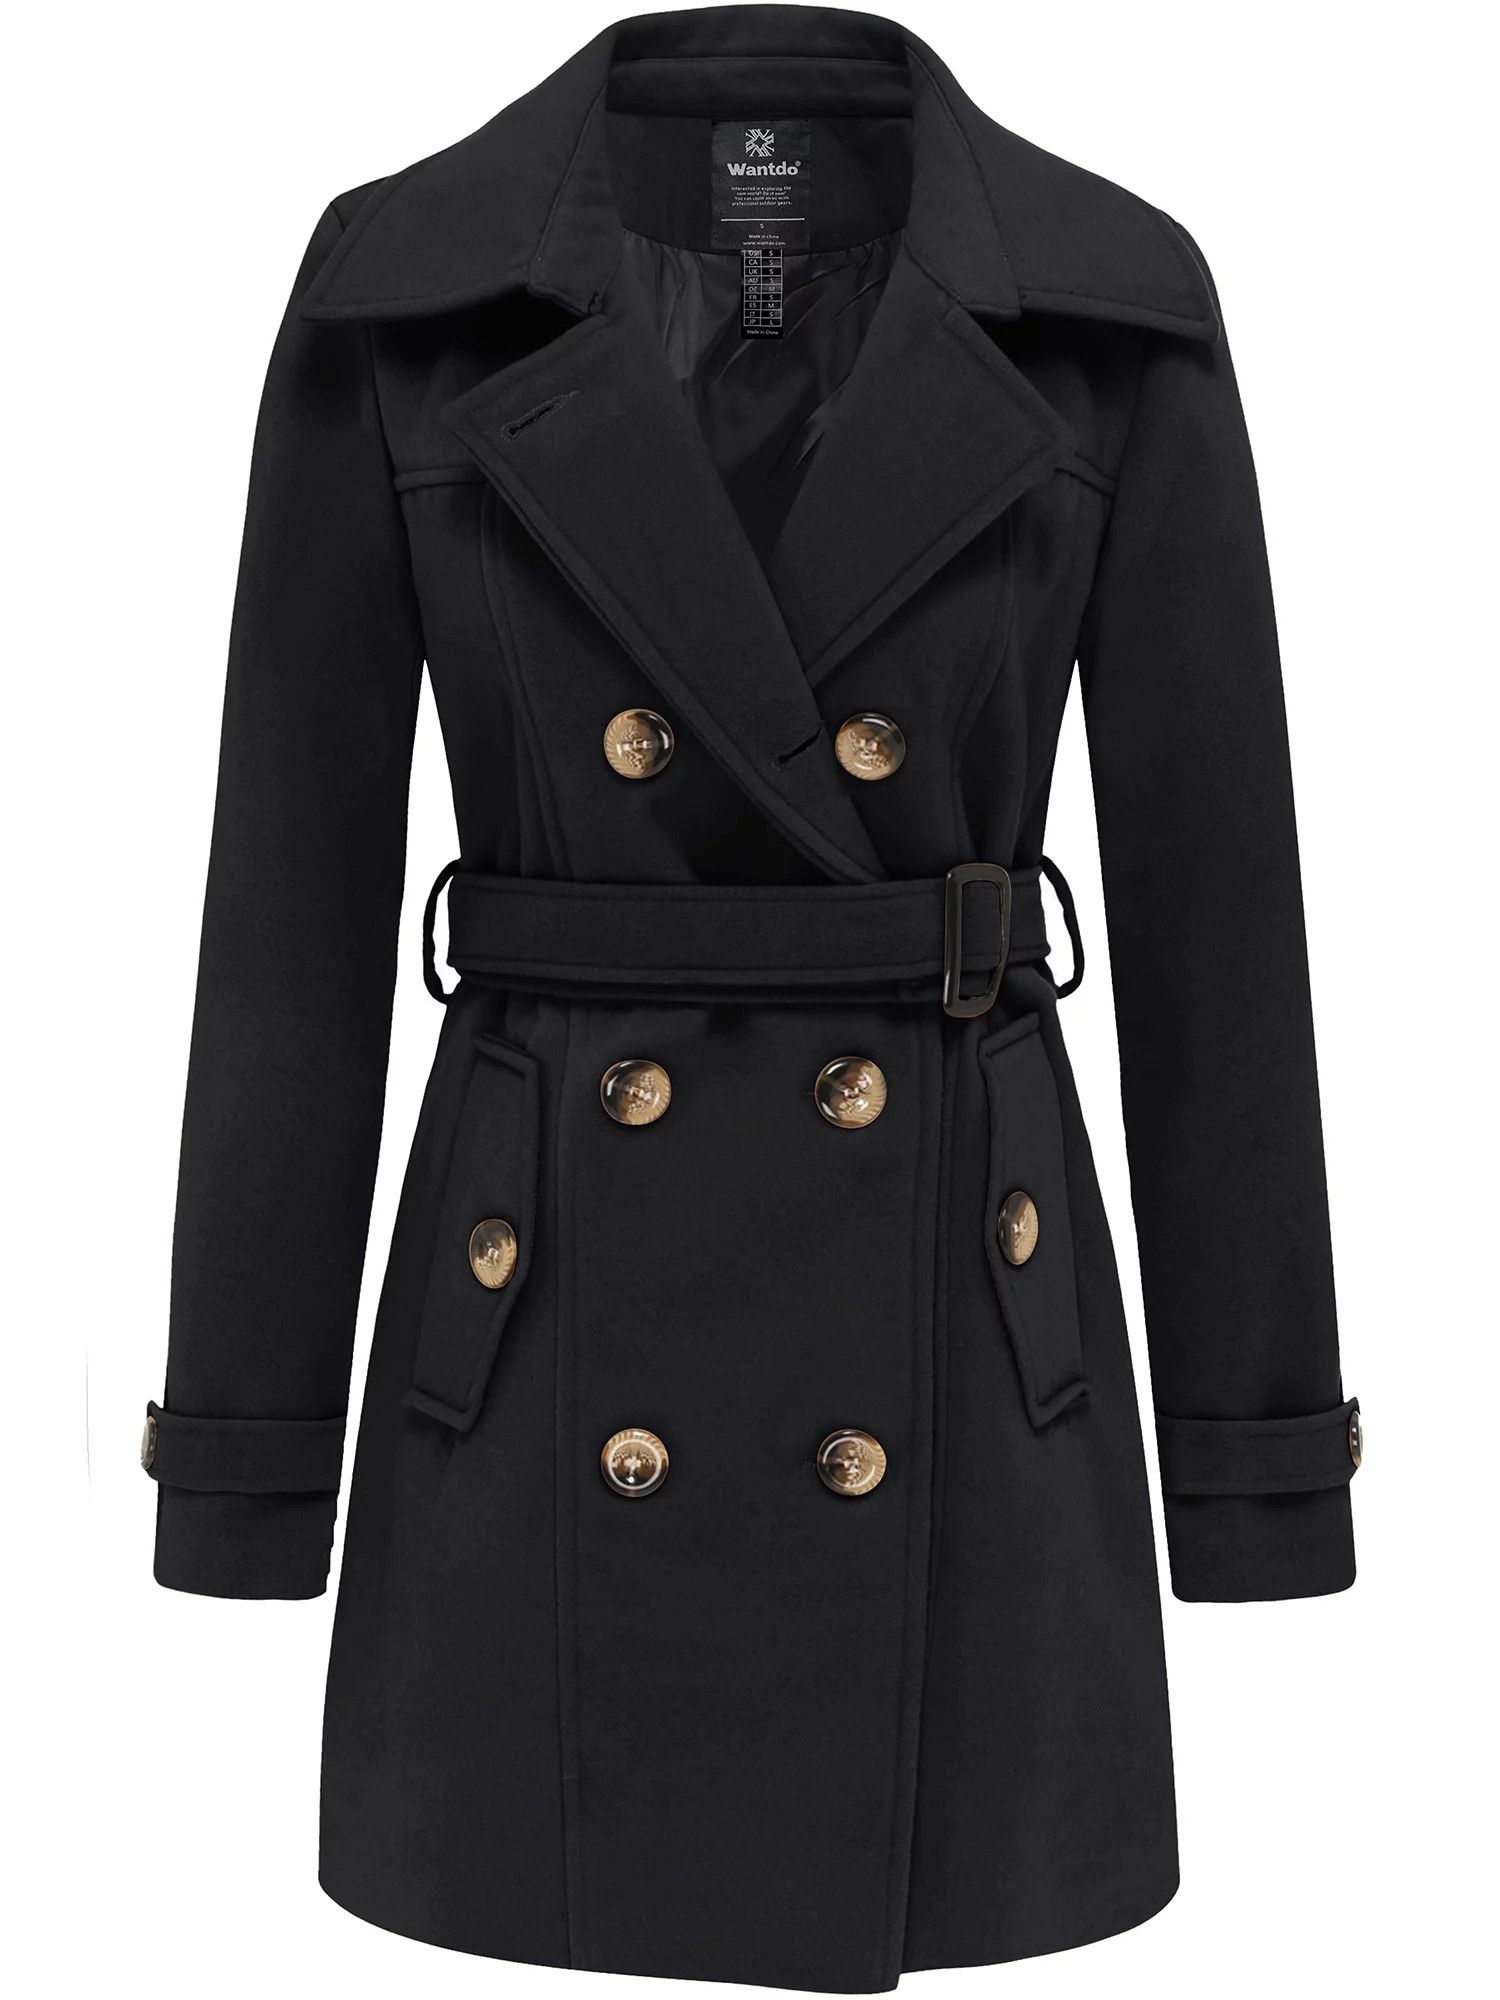 Wantdo Women's Double Breasted Pea Coat Winter Mid-Long Trench Coat with Belt Black Size S - Walm... | Walmart (US)